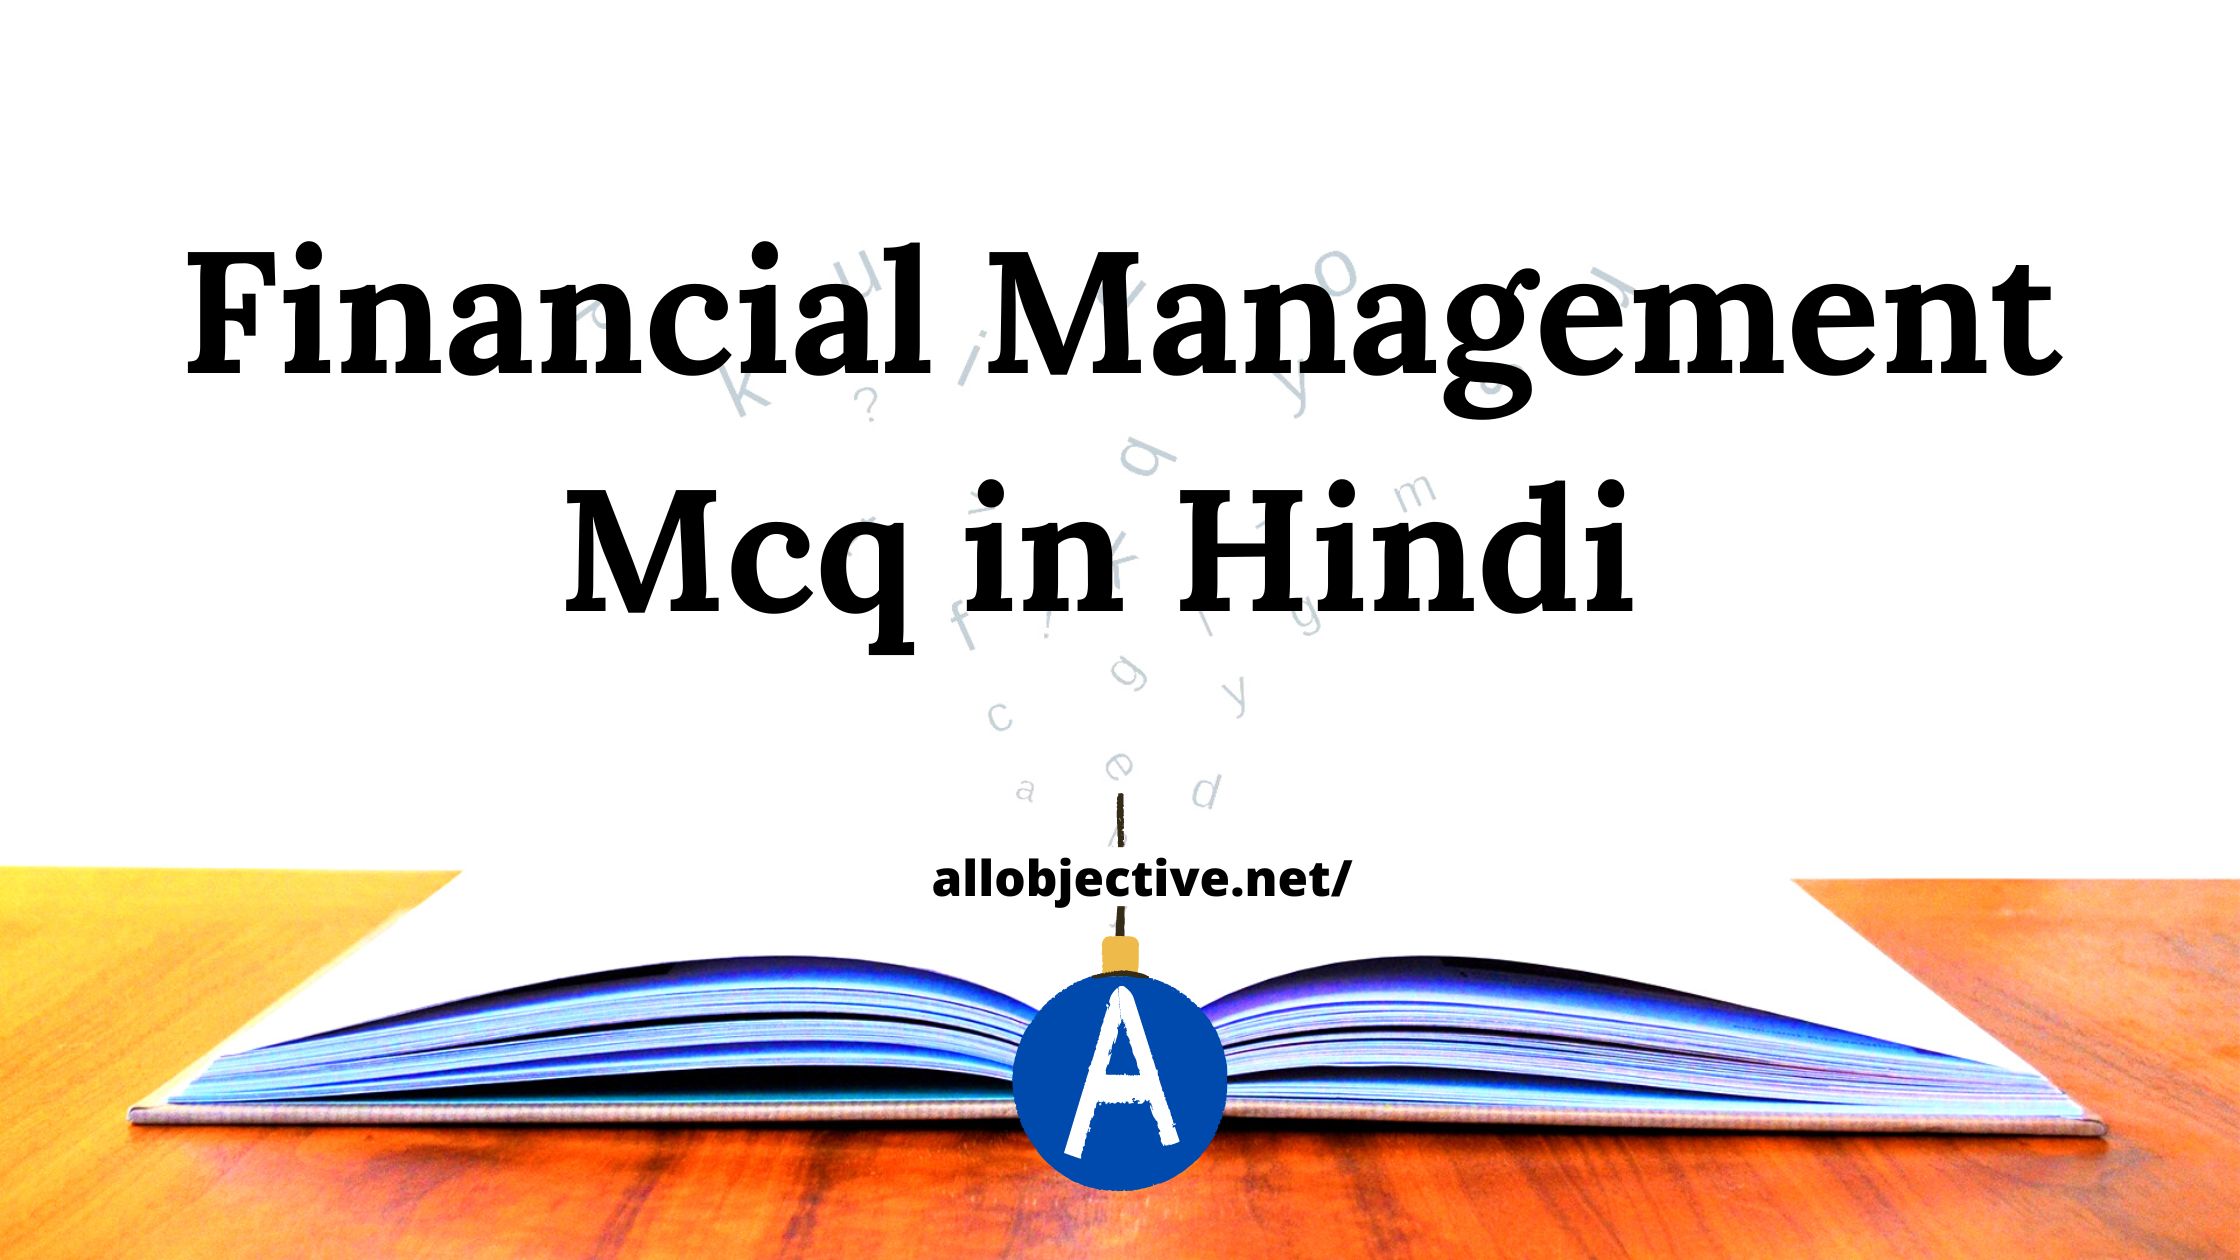 Financial Management Mcq in Hindi